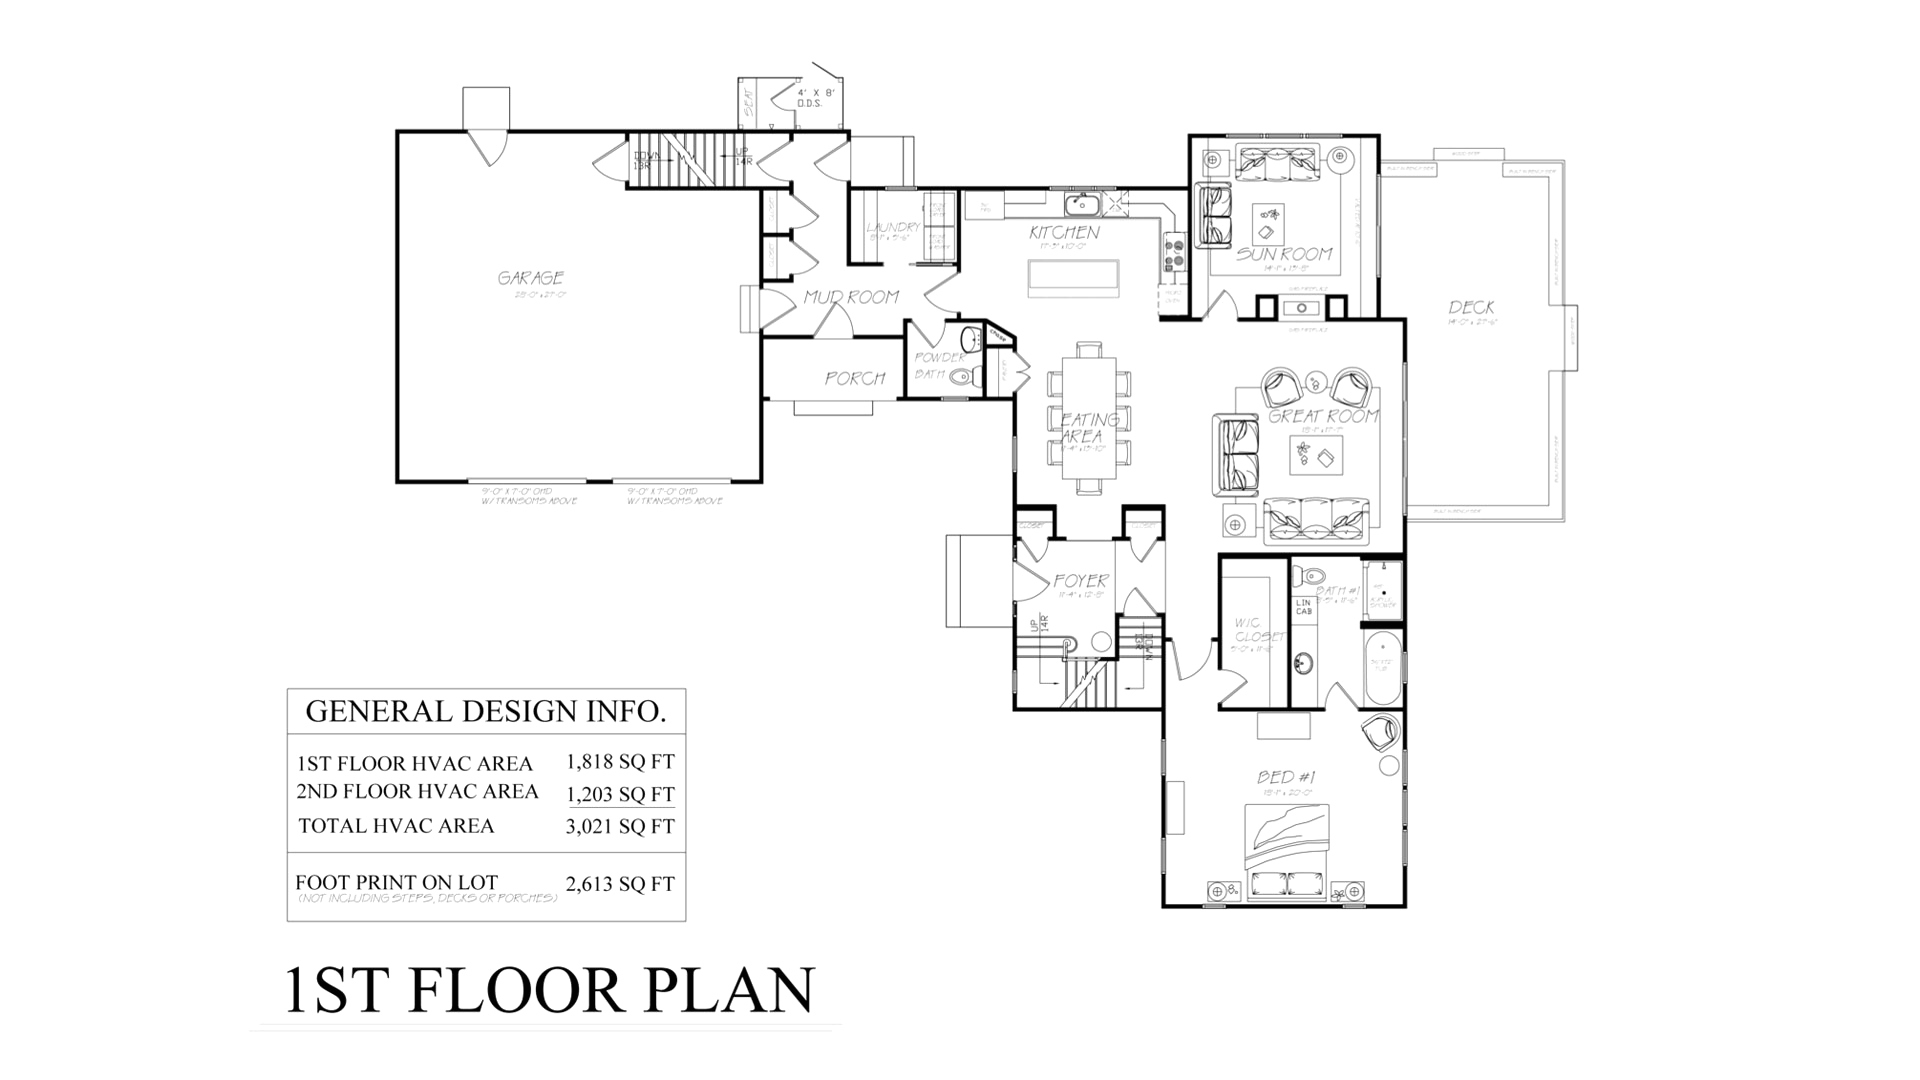 house plans with indoor swimming pool floor plans with indoor pool modern house plans with swimming